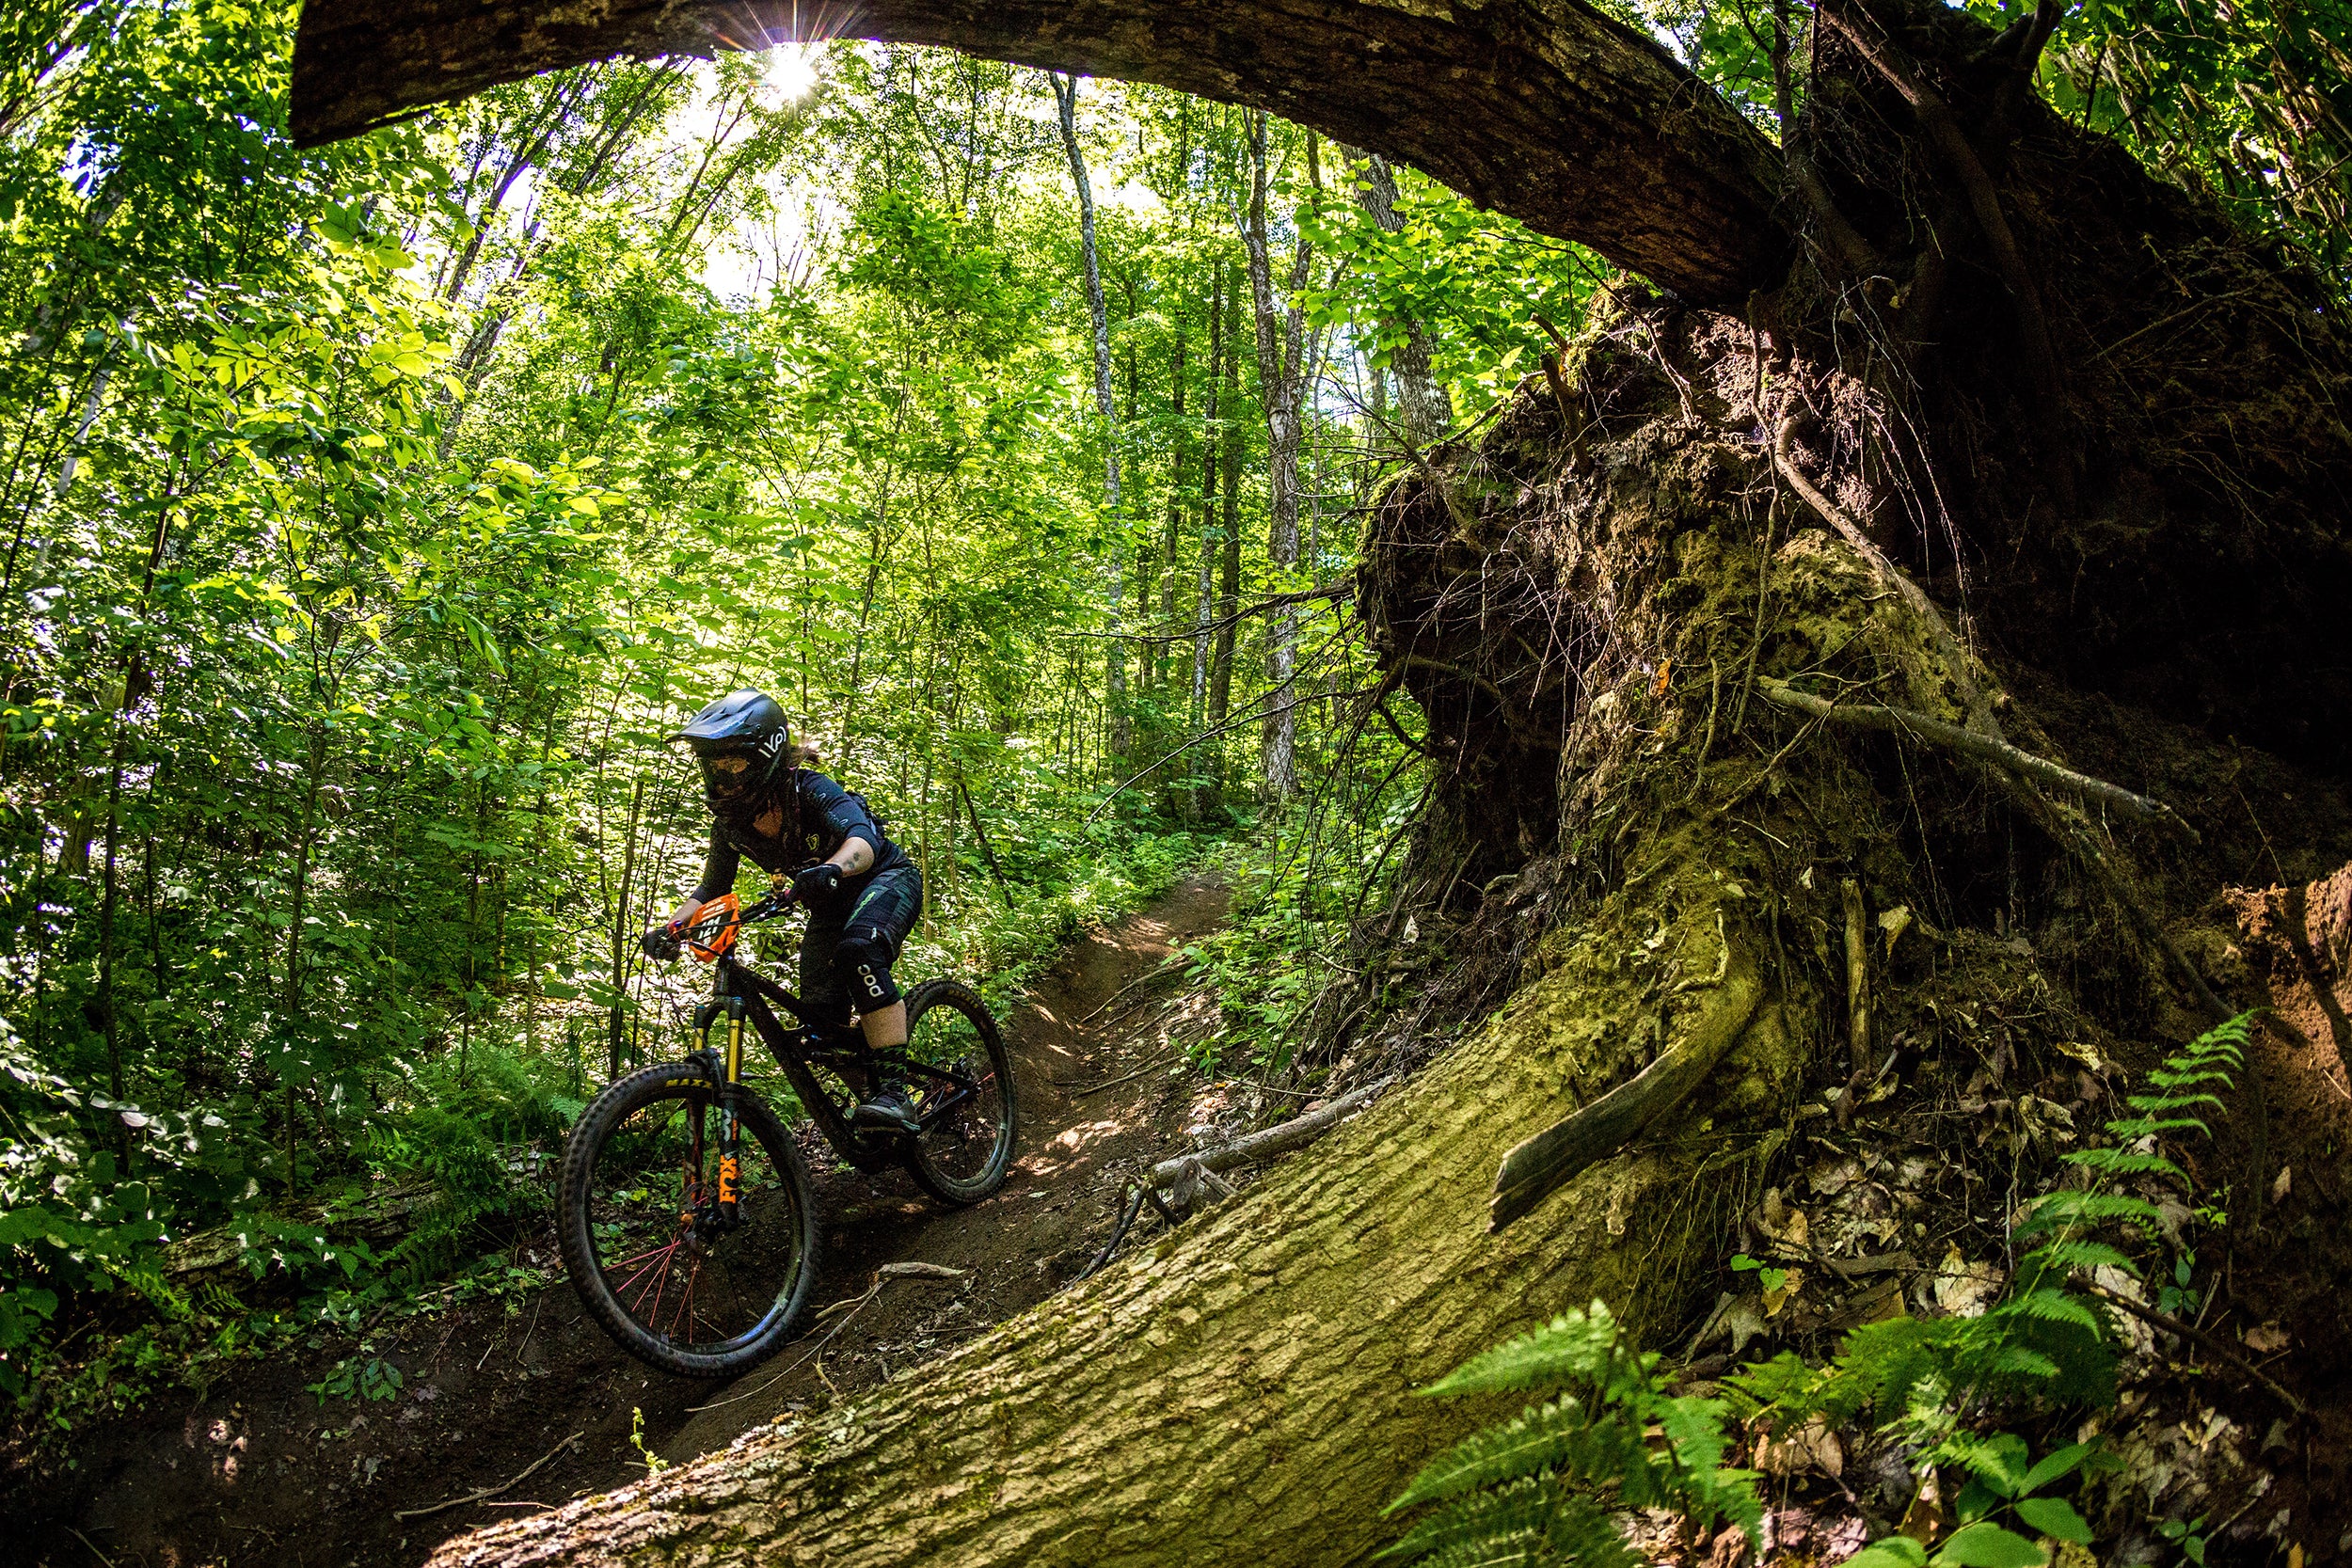 Downhill Bike Park Tips for First-Timers: Go With a Friend